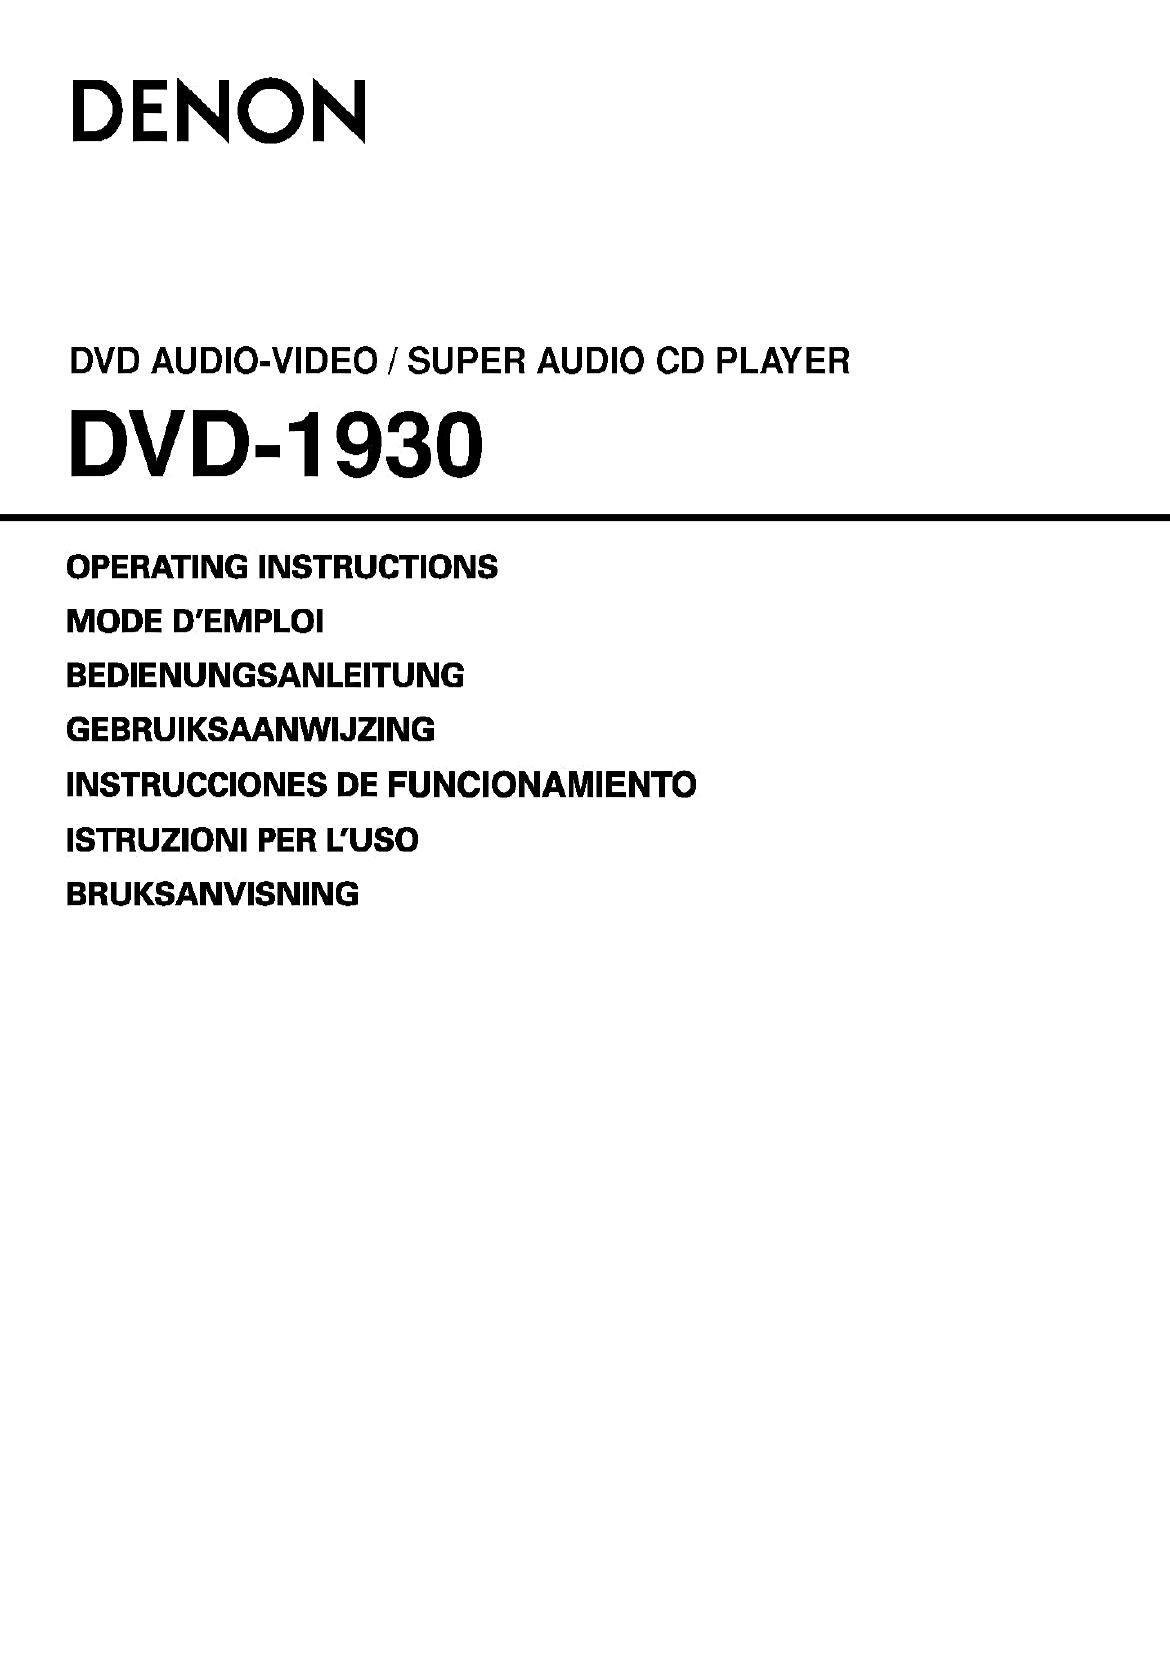 Denon DVD 1930 Owners Manual